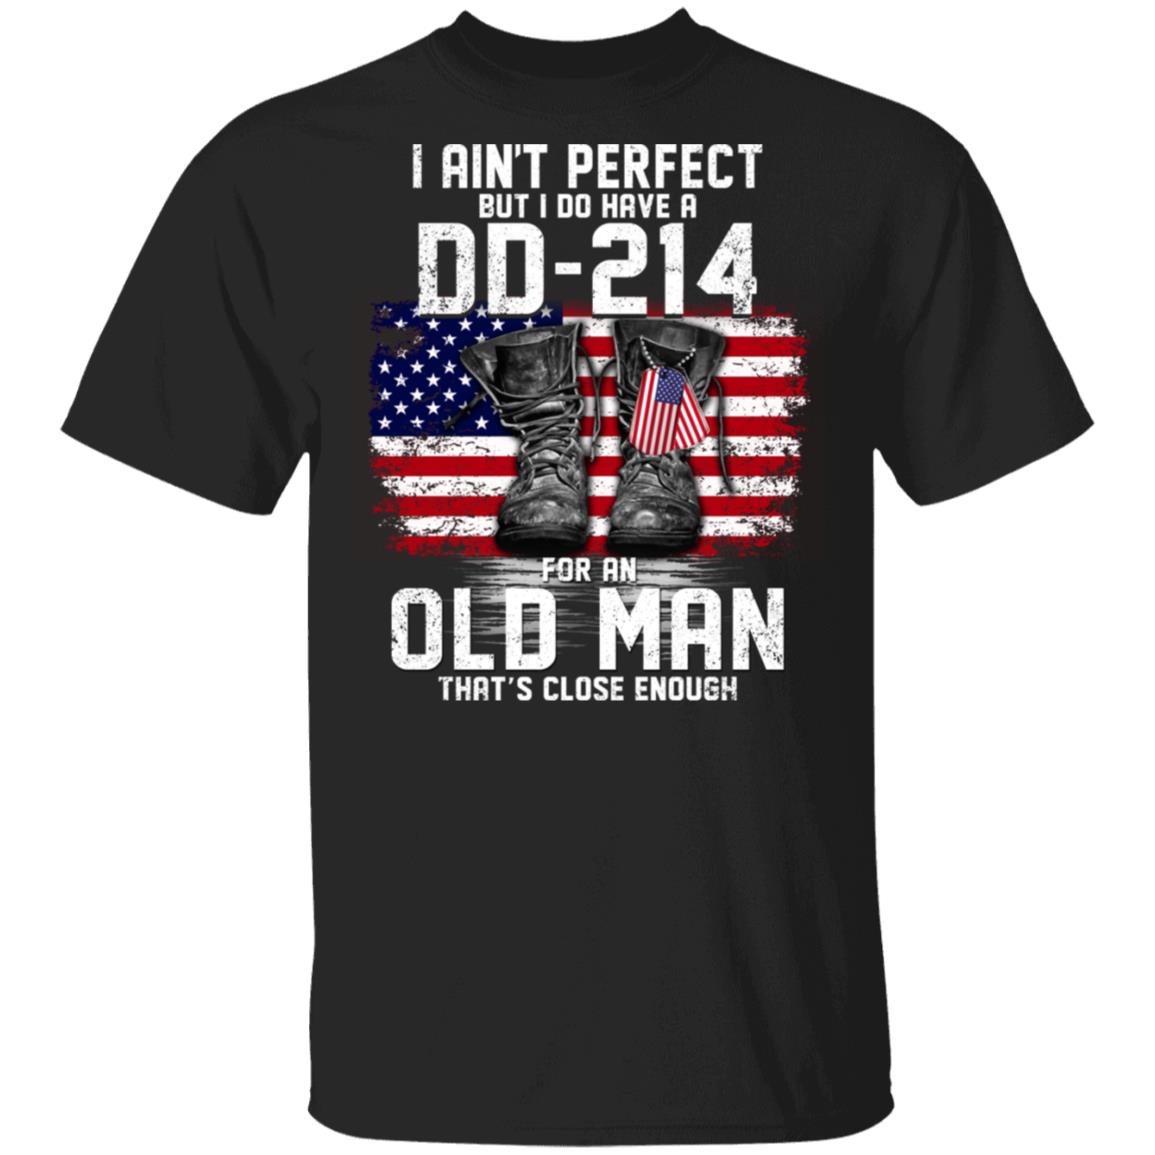 I Aint Perfect But I Do Have A Dd 214 For An Old Man Thats Close Enough T-Shirt Veteran Gifts